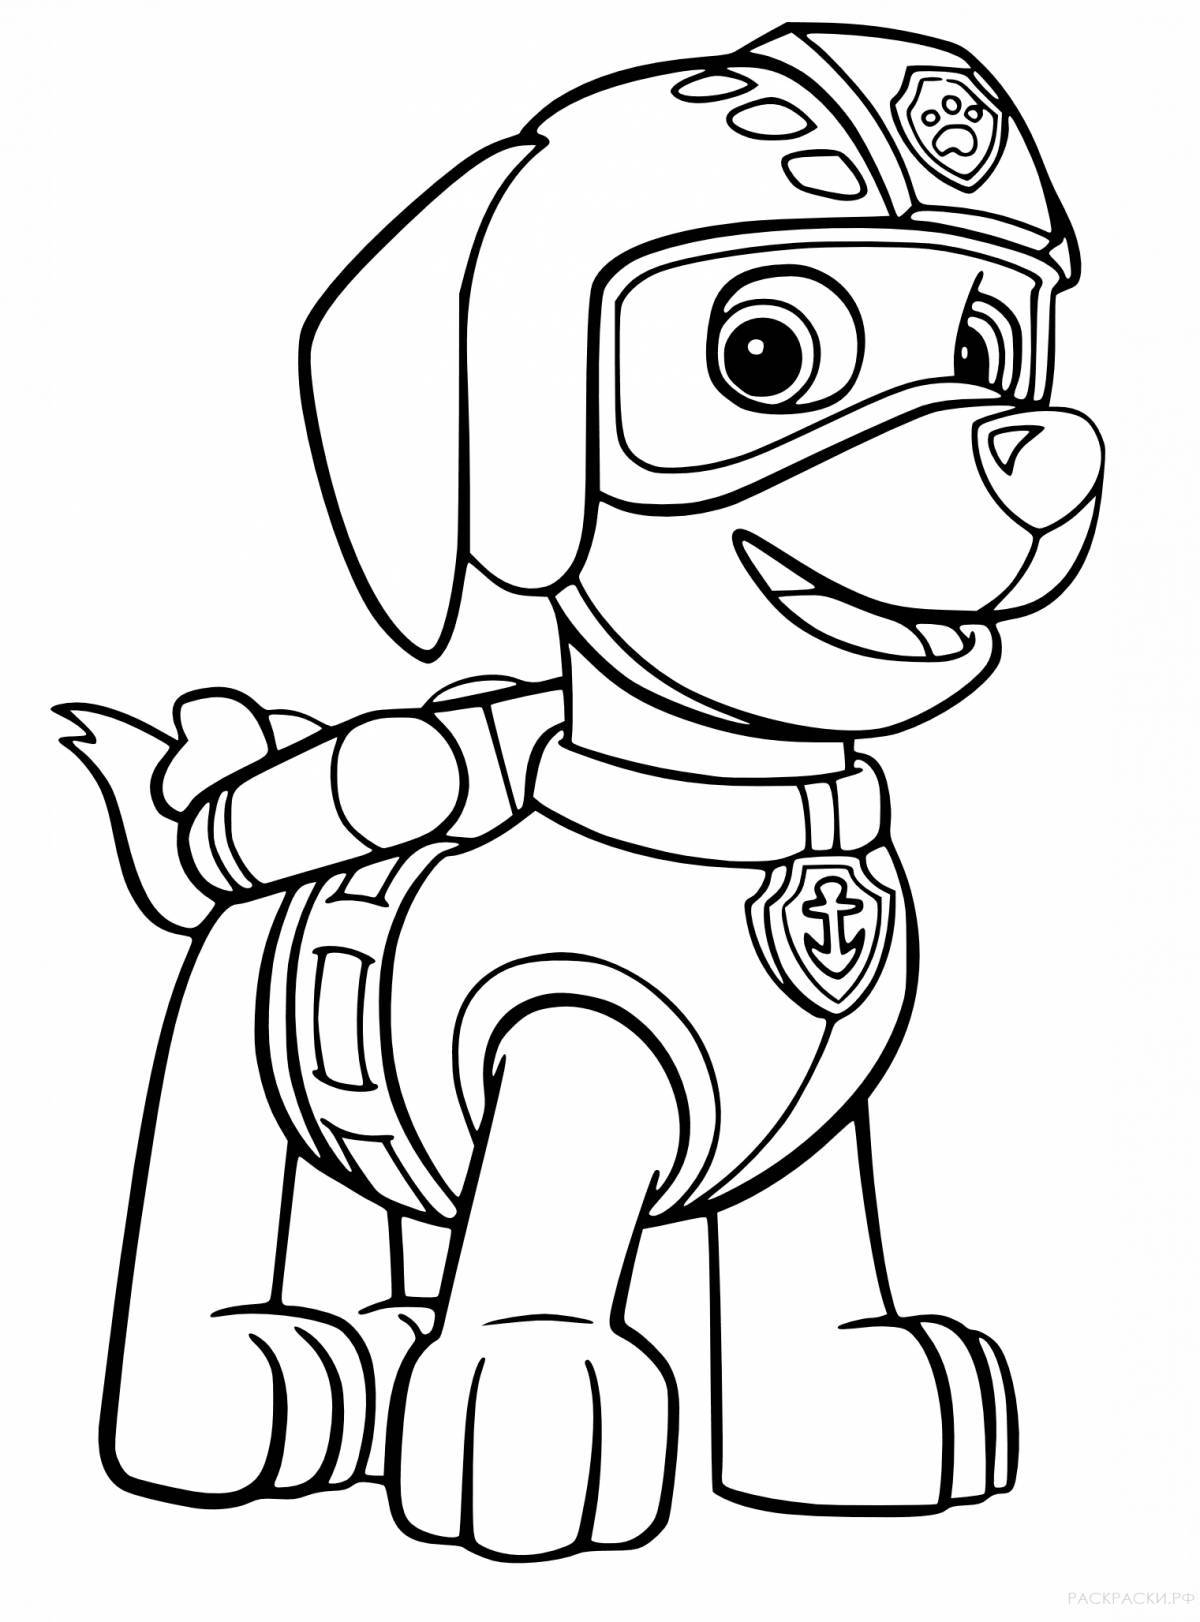 Paw patrol pictures #2